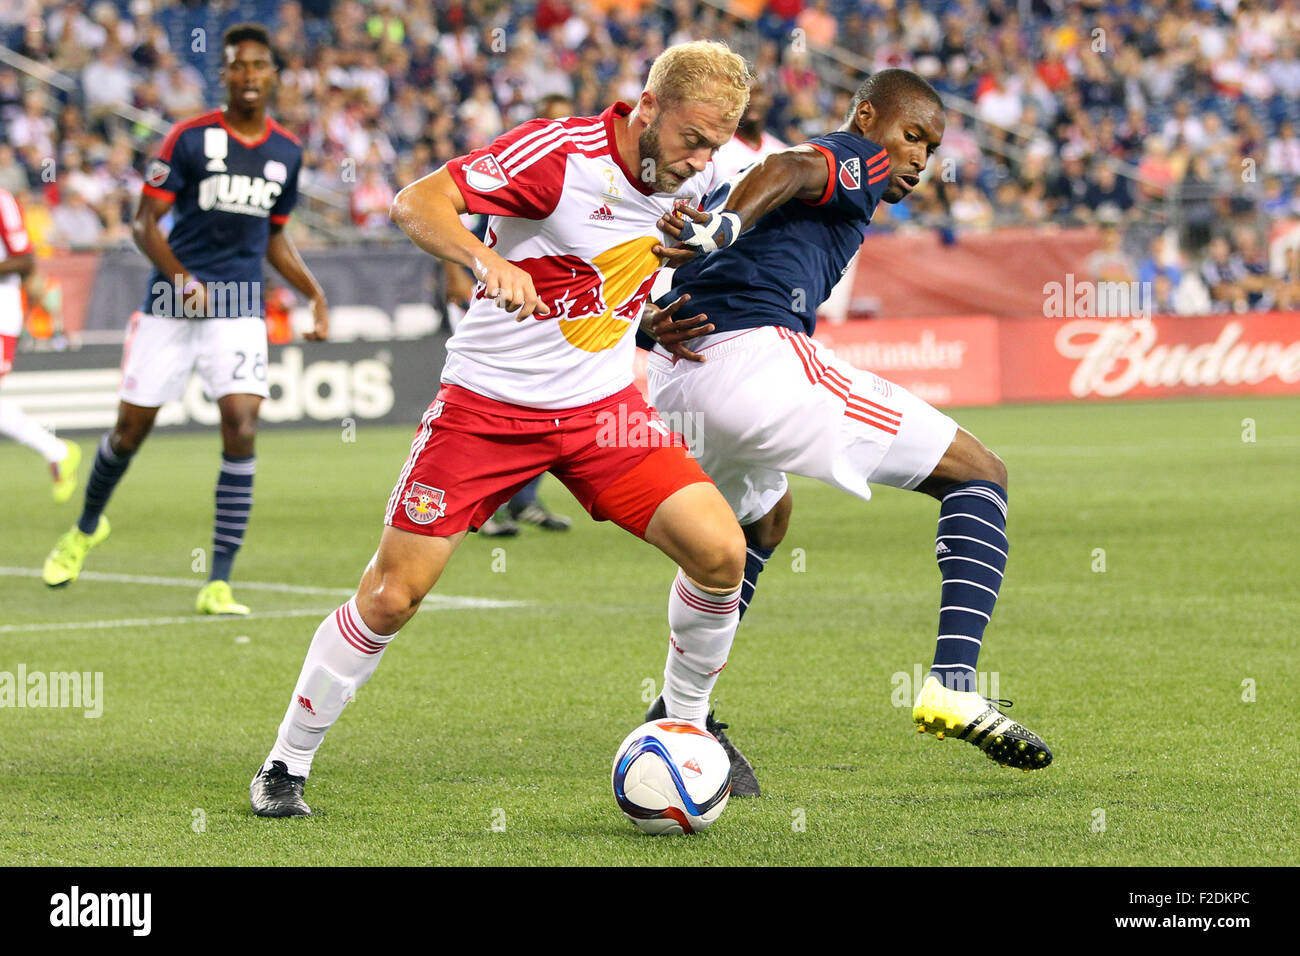 Foxborough, Massachussetts, USA. 16th September, 2015. New England Revolution defender Jose Goncalves (23) and New York Red Bulls forward Mike Grella (13) in action during the first half of the MLS game between the New England Revolution and New York Red Bulls at Gillette Stadium. Credit:  Cal Sport Media/Alamy Live News Stock Photo